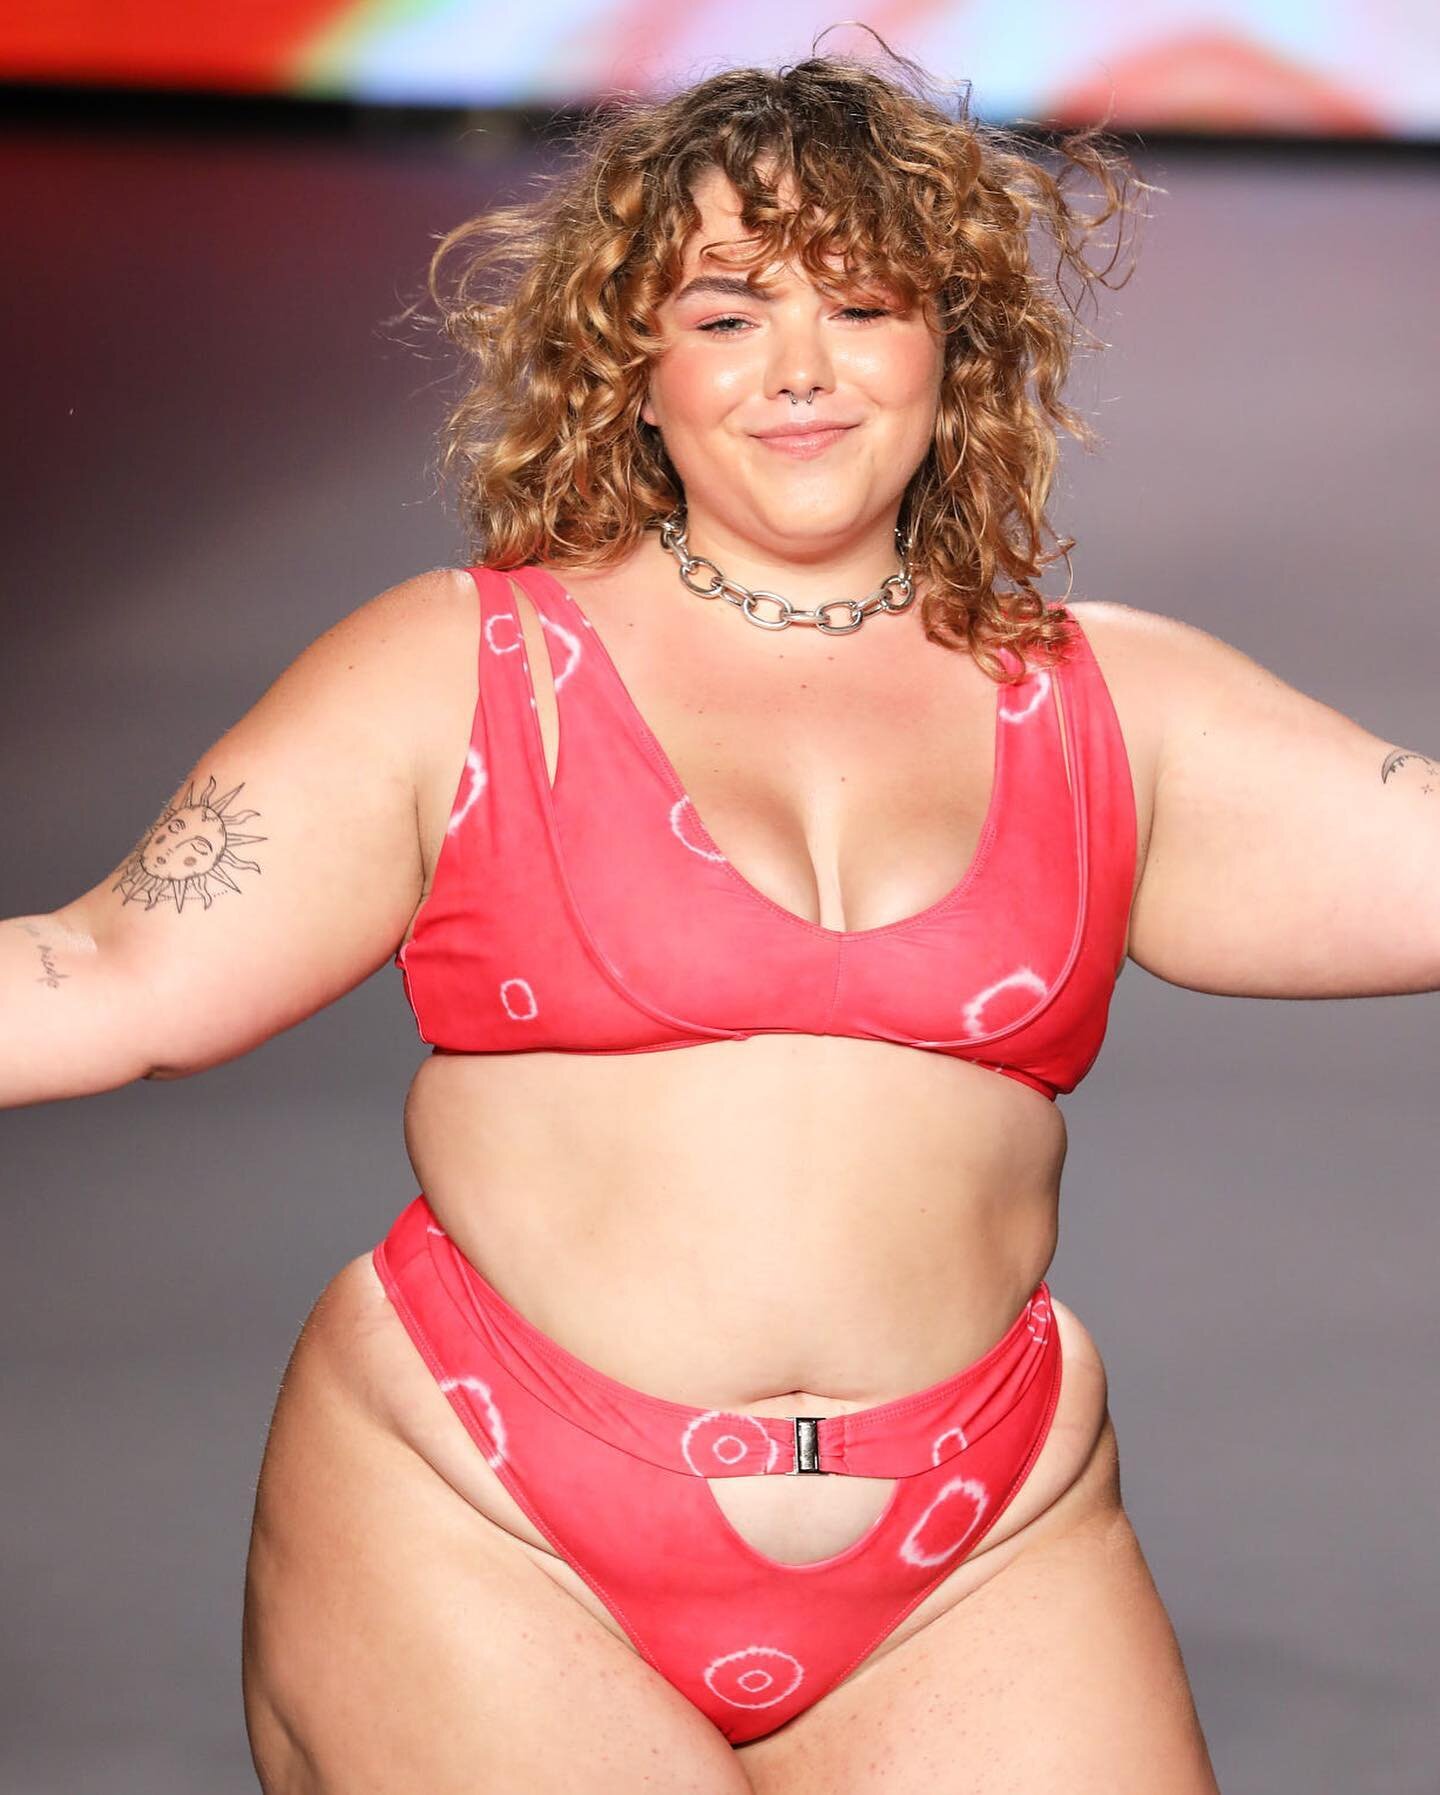 Miami swim week has come to an end and I&rsquo;m eternally grateful to have represented plus size women in an industry where we are few and far between. Thank you @myhappy_____ @stefroitman for making me a part of your show and celebrating inclusivit